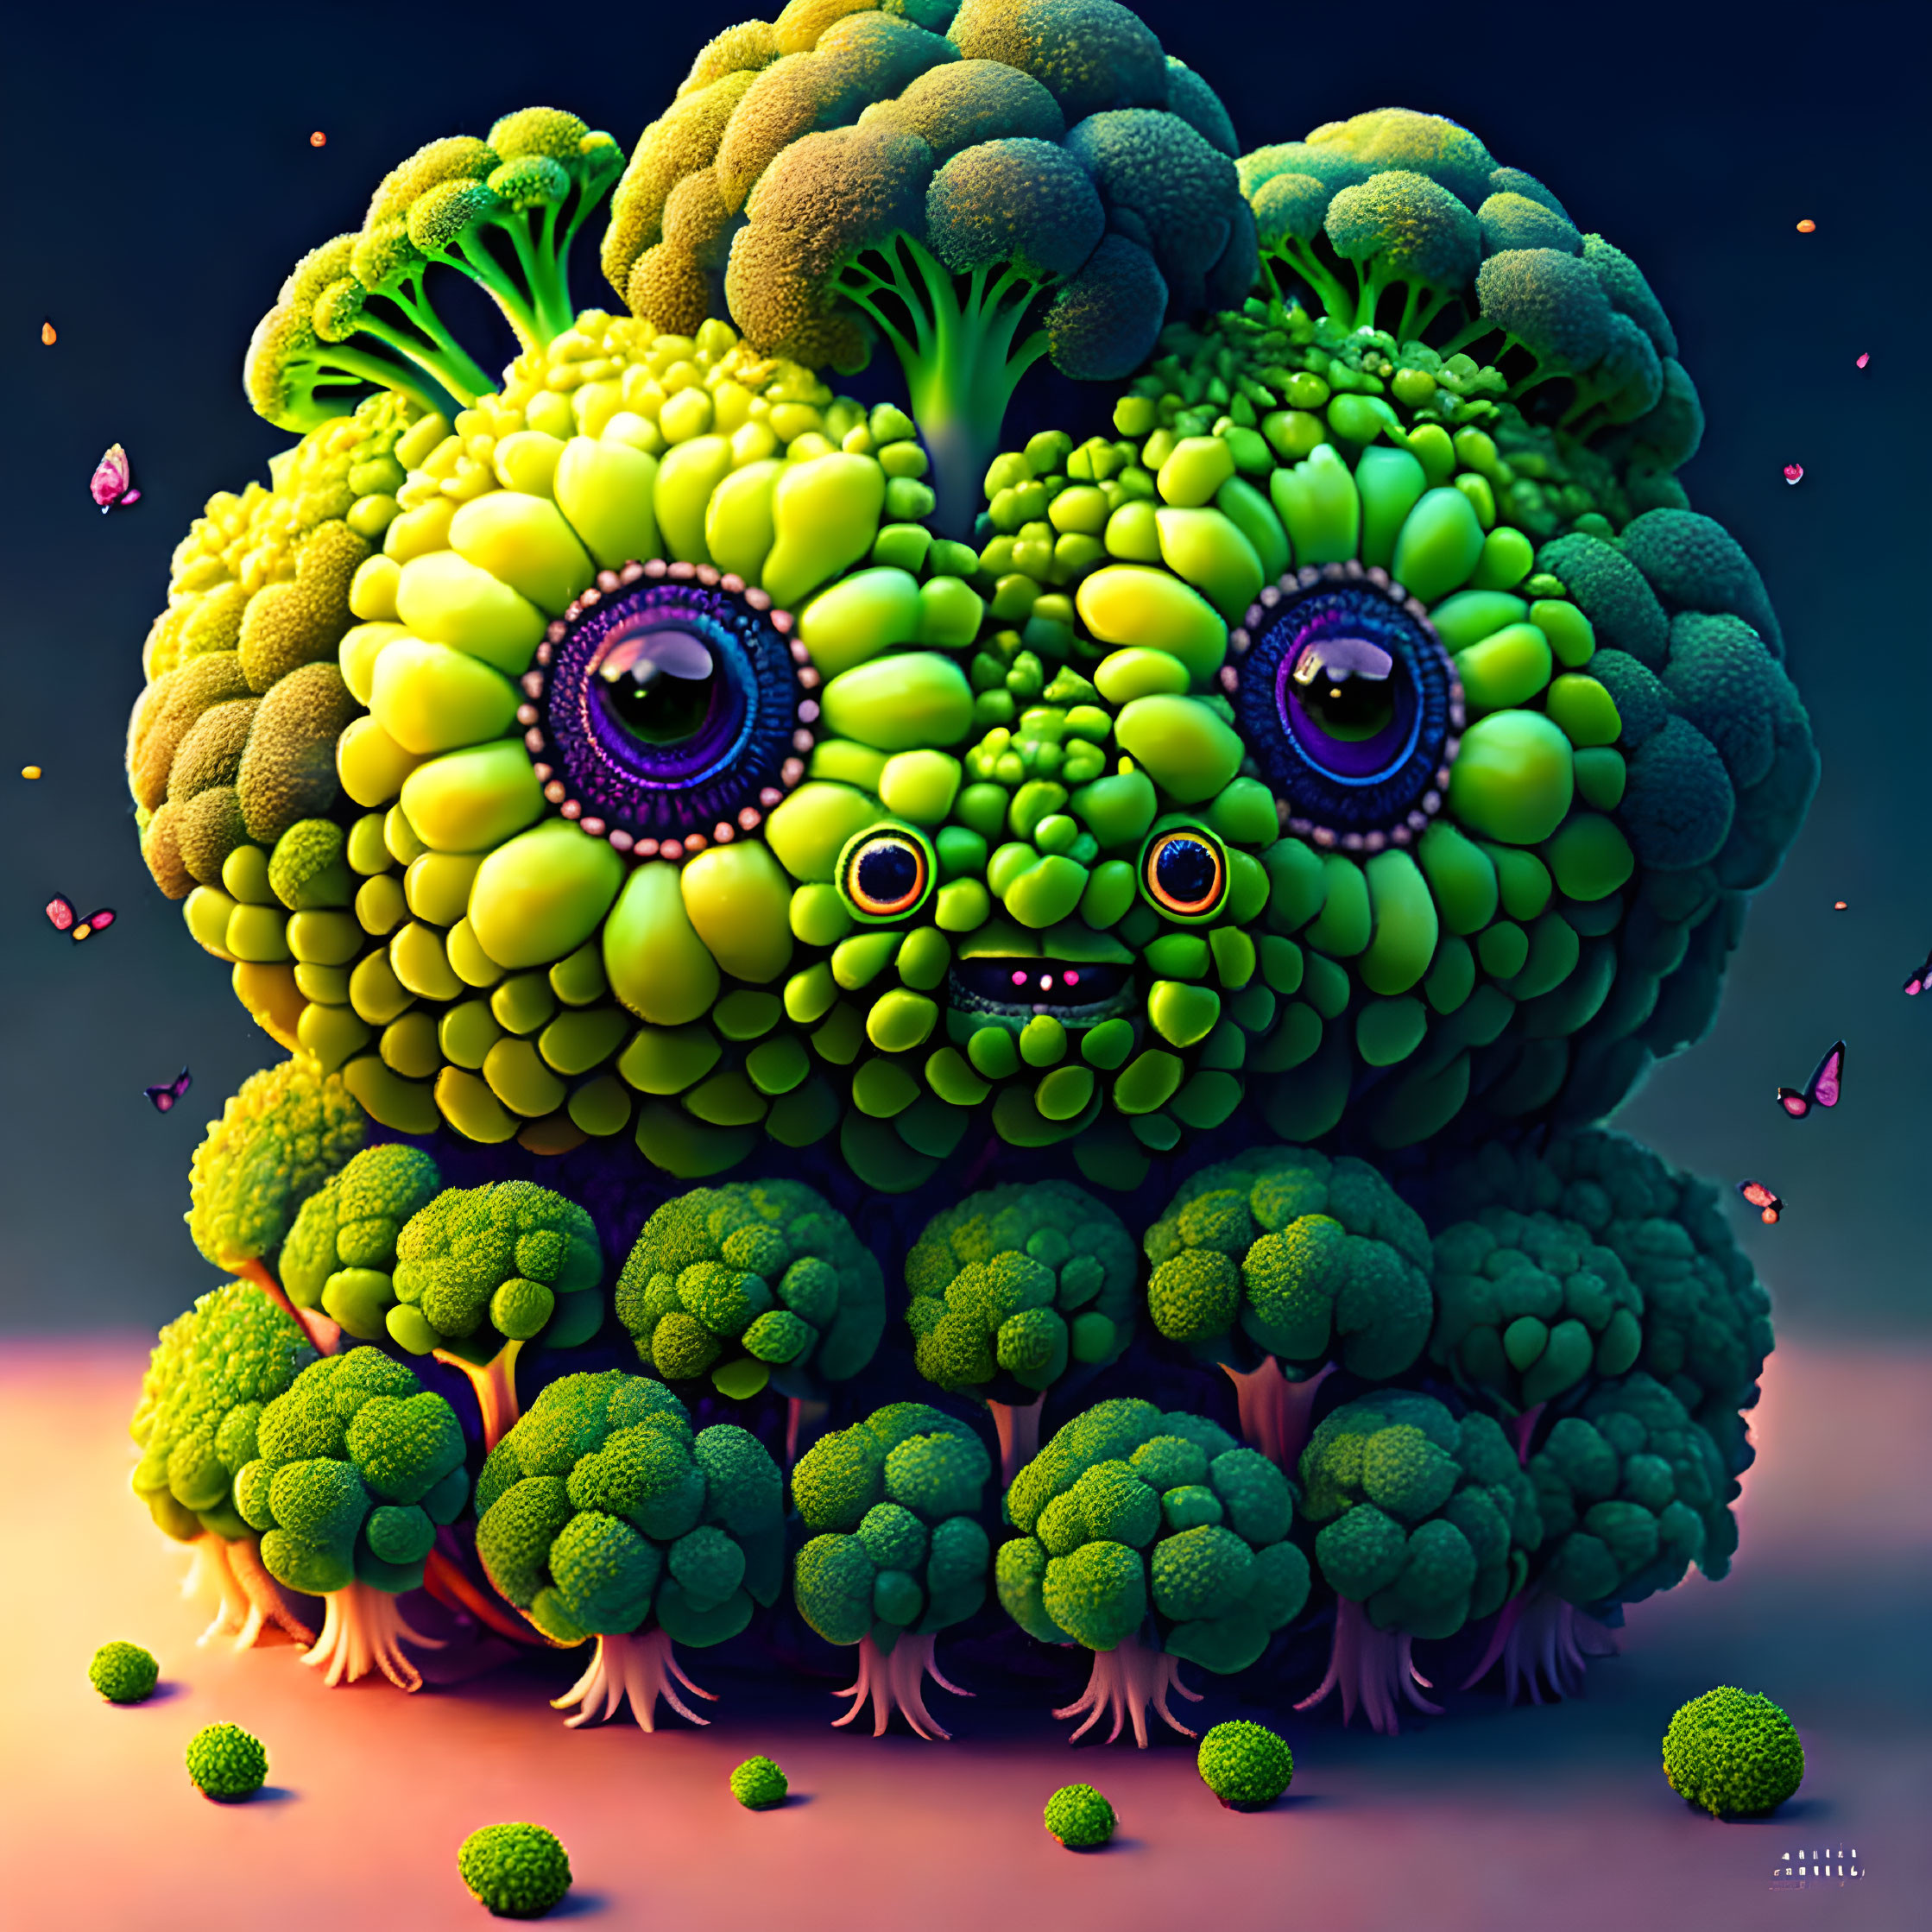 Anthropomorphic broccoli with purple eyes and butterflies on gradient background